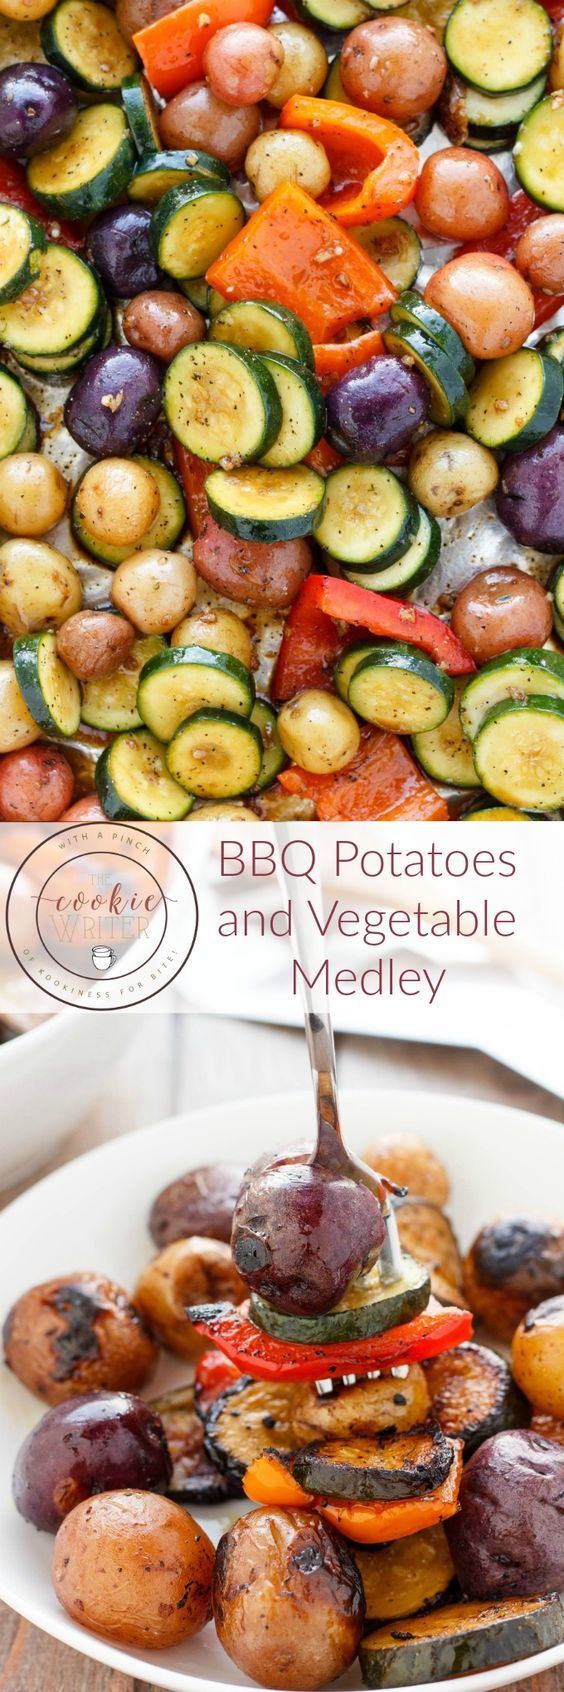 The Cookie Writer - BBQ potatoes and vegetables medley